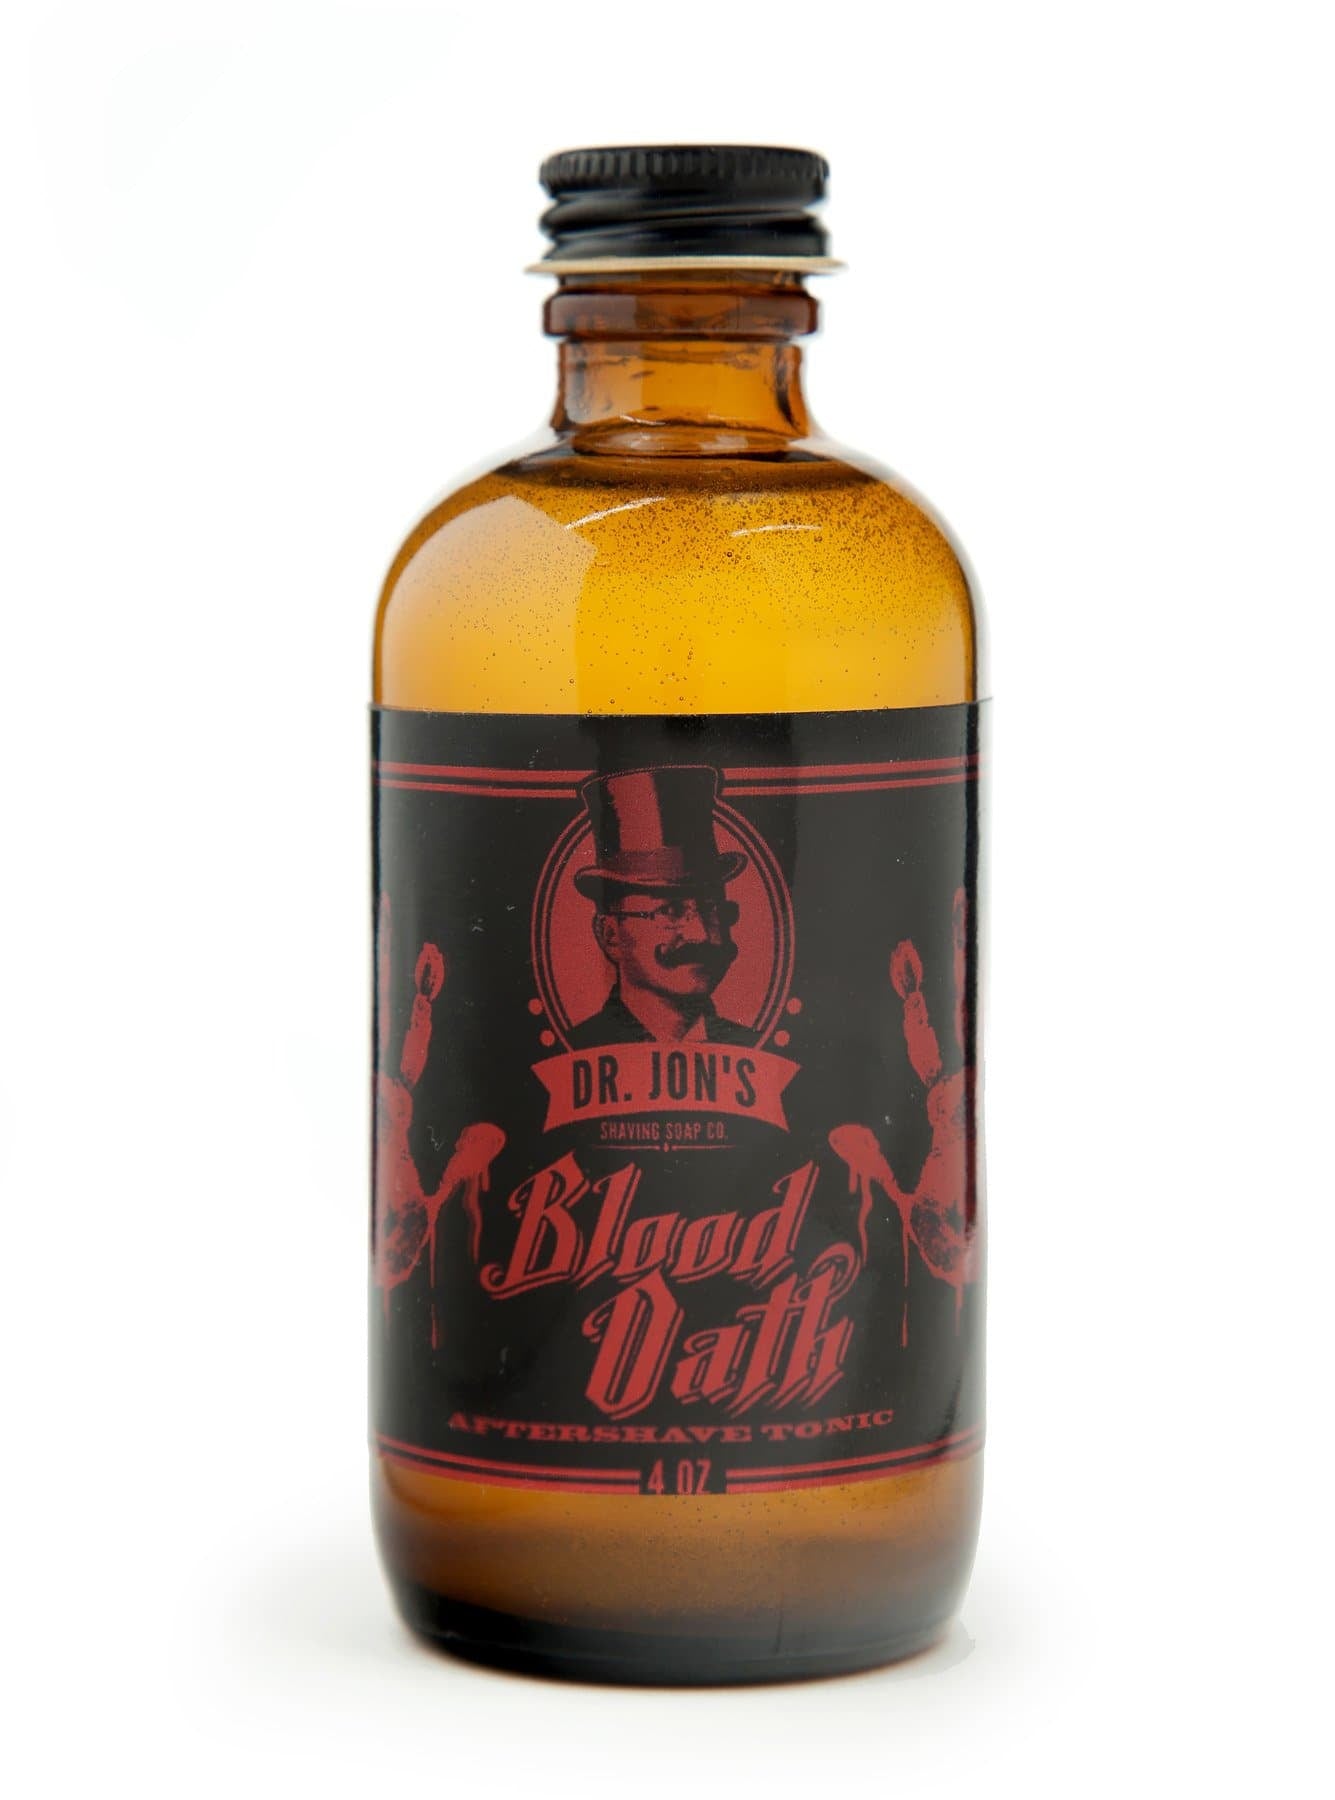 Dr. Jon's Blood Oath Aftershave Tonic